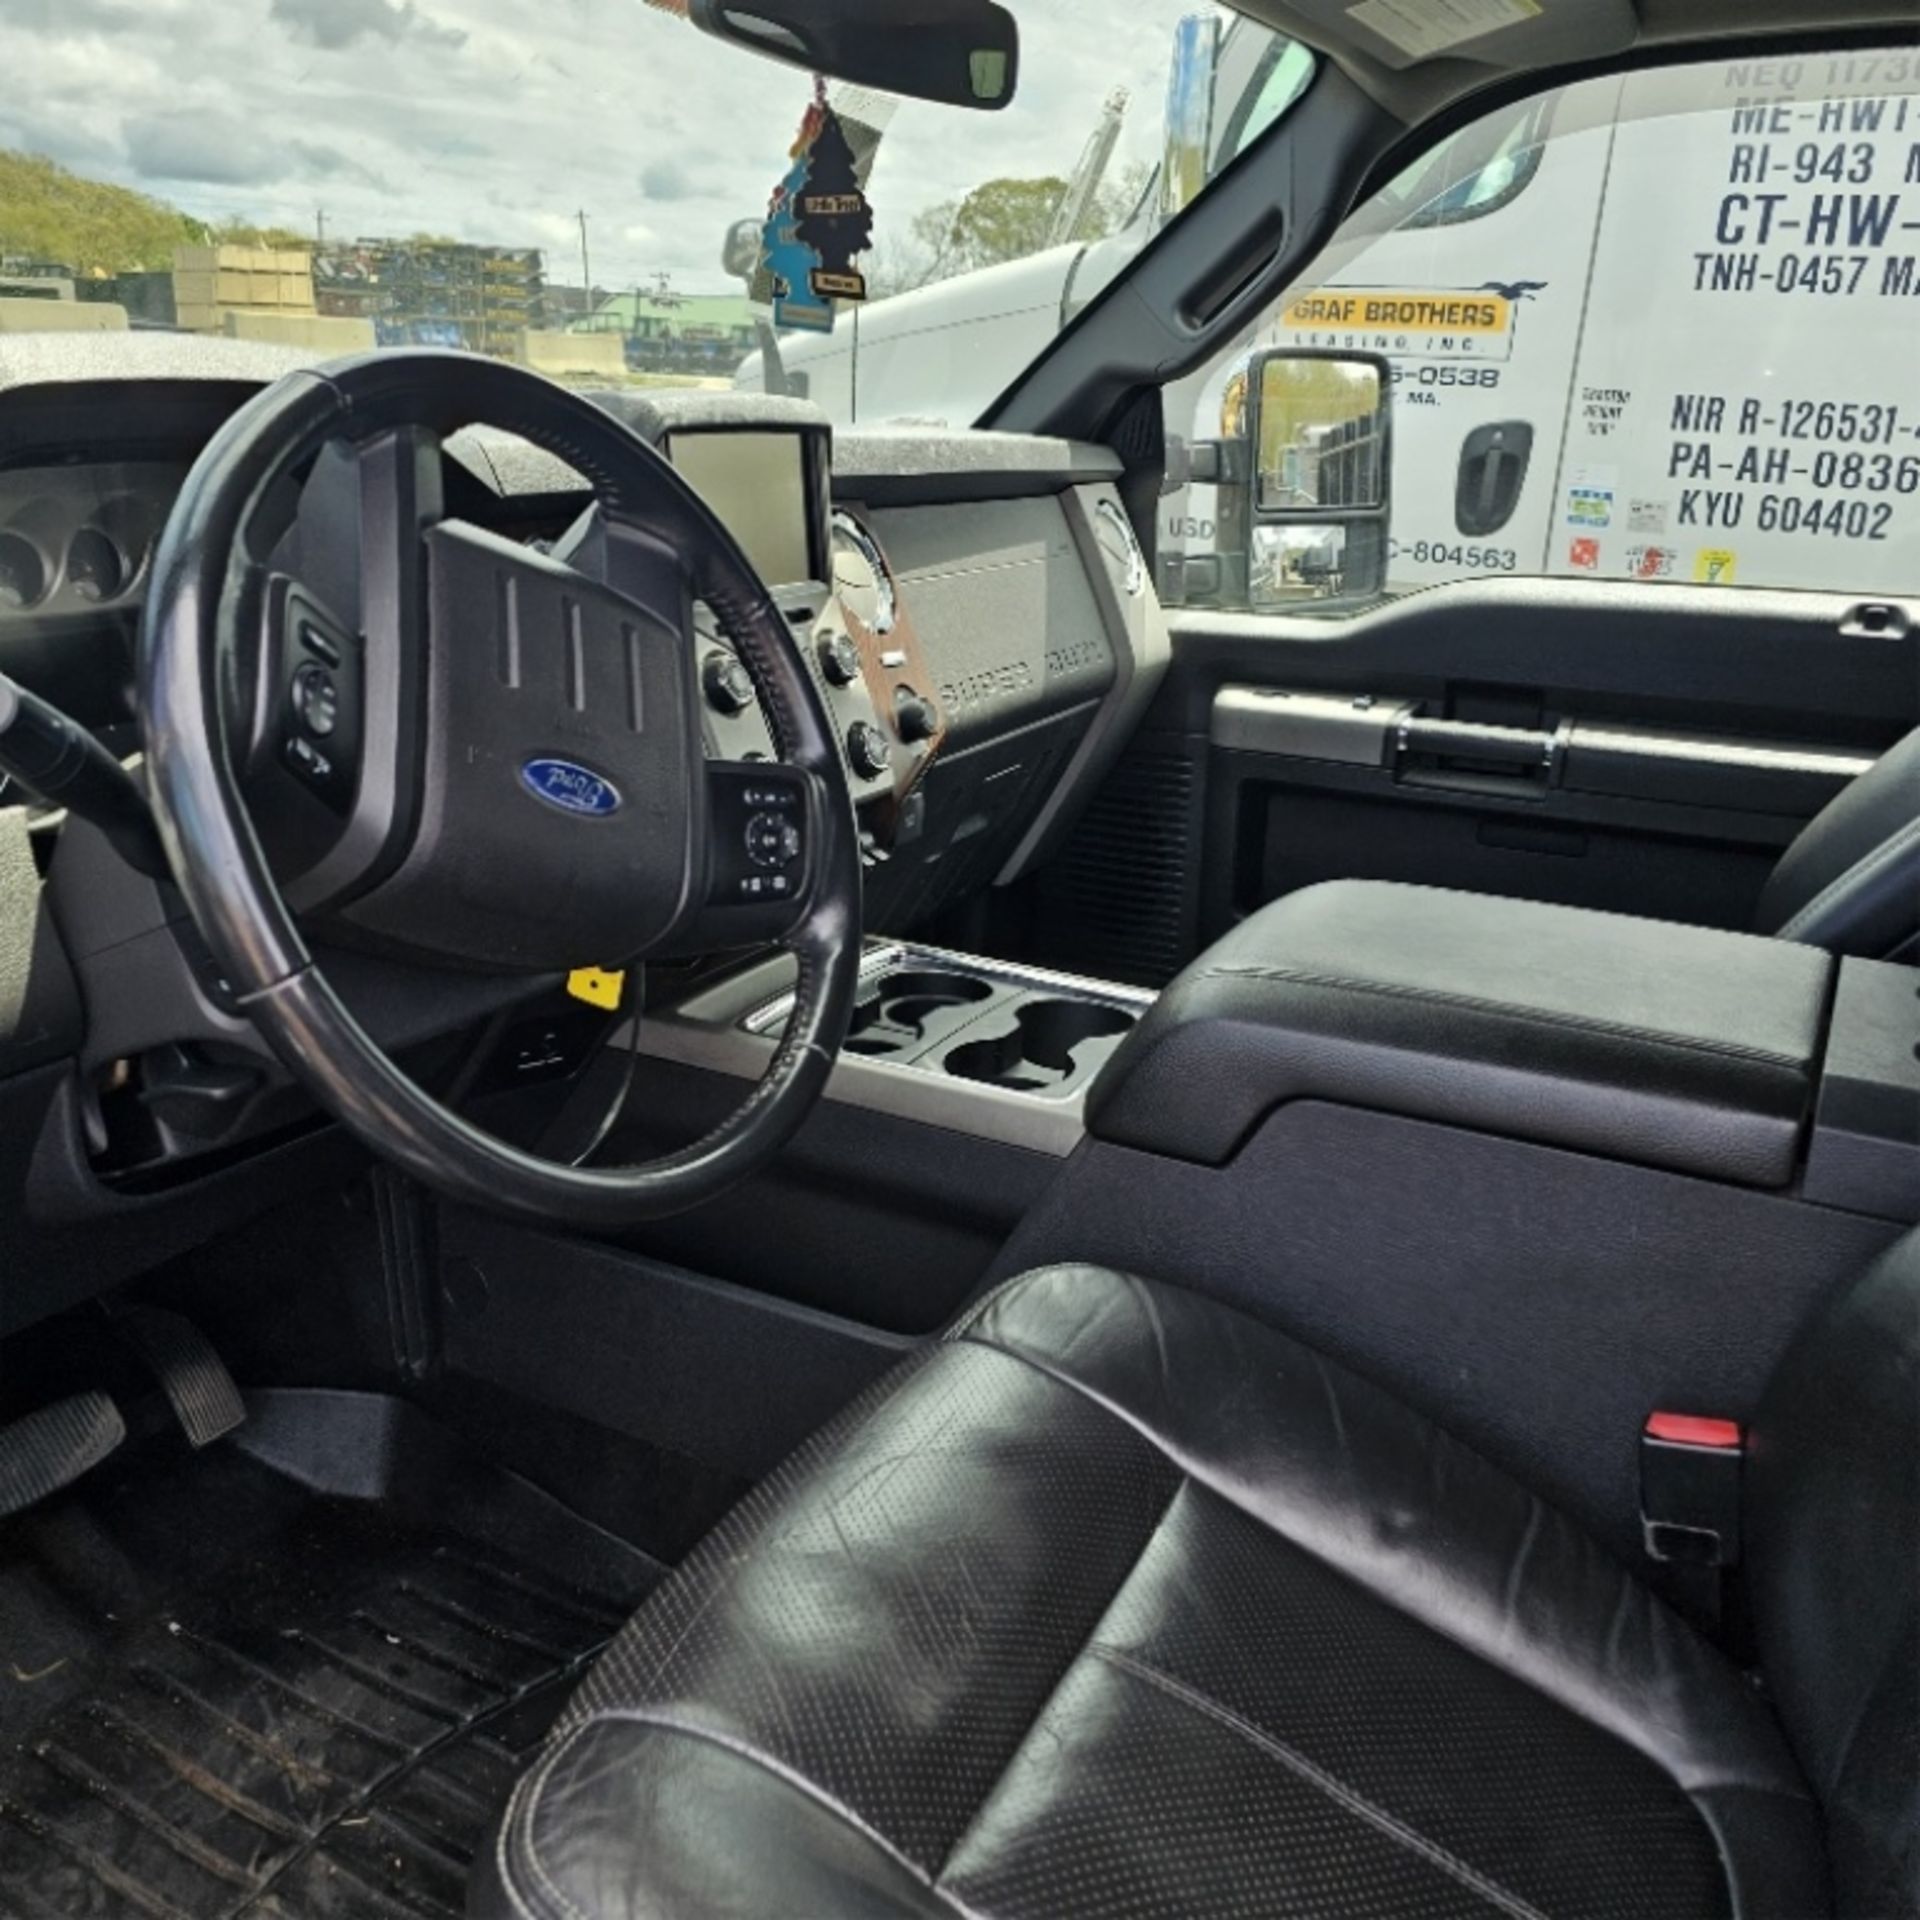 2014 Ford F250 Pickup - Image 8 of 10